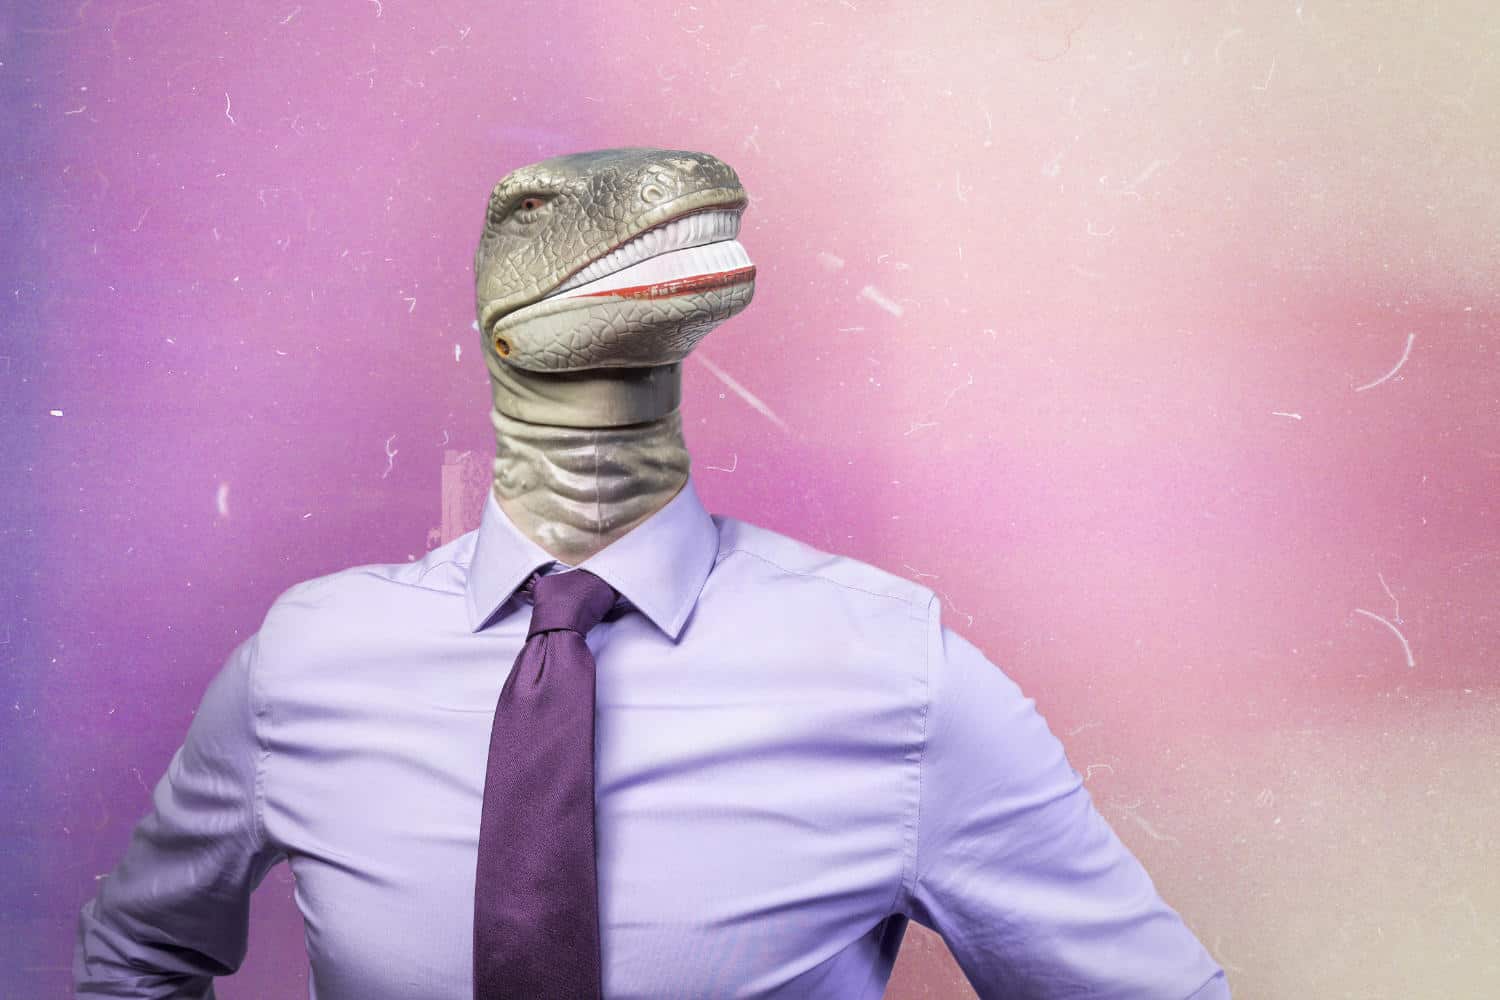 Photo of a dinosaur head wearing a suit and tie